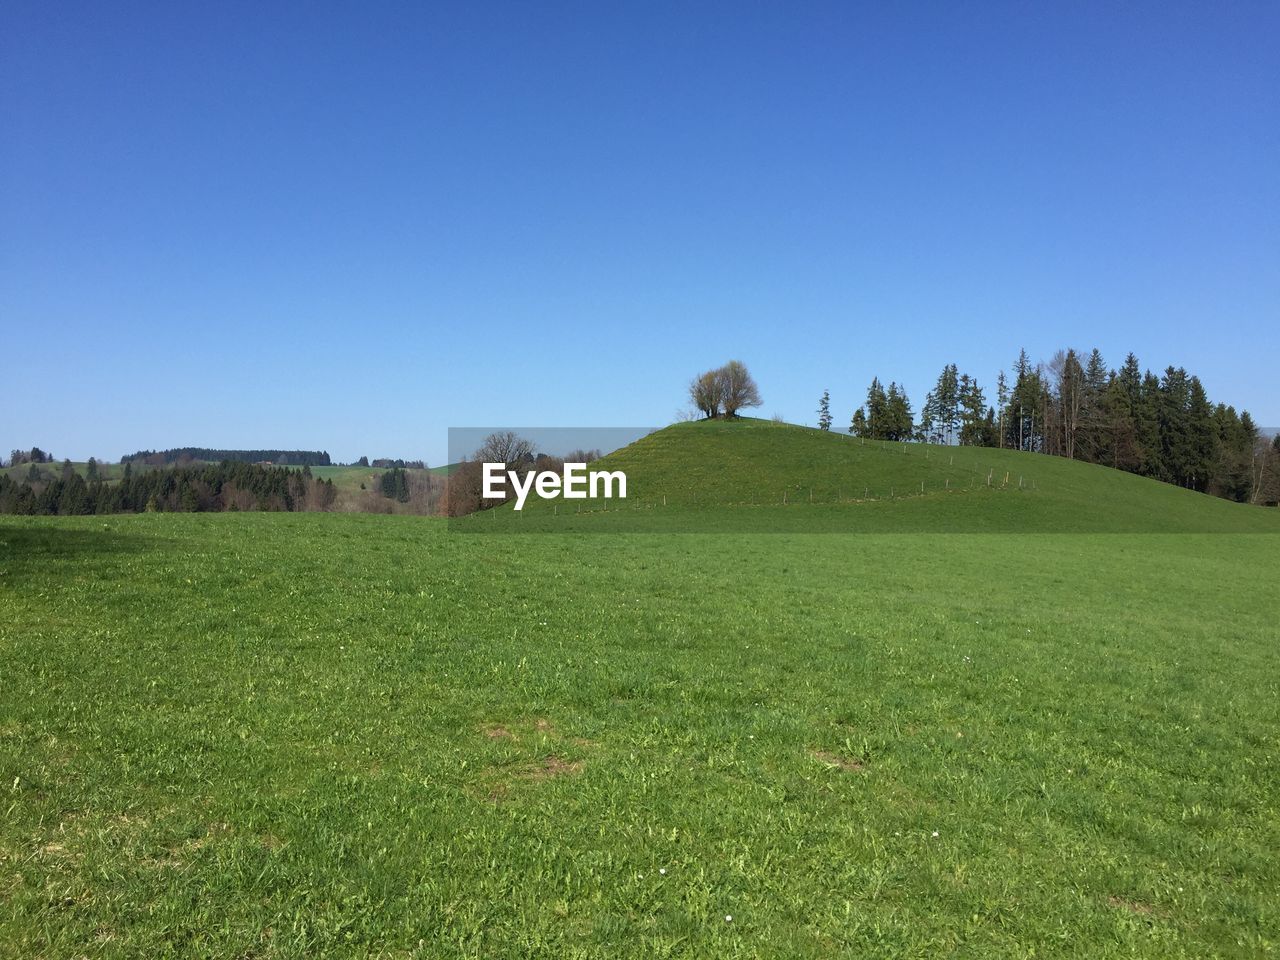 SCENIC VIEW OF GREEN FIELD AGAINST CLEAR BLUE SKY